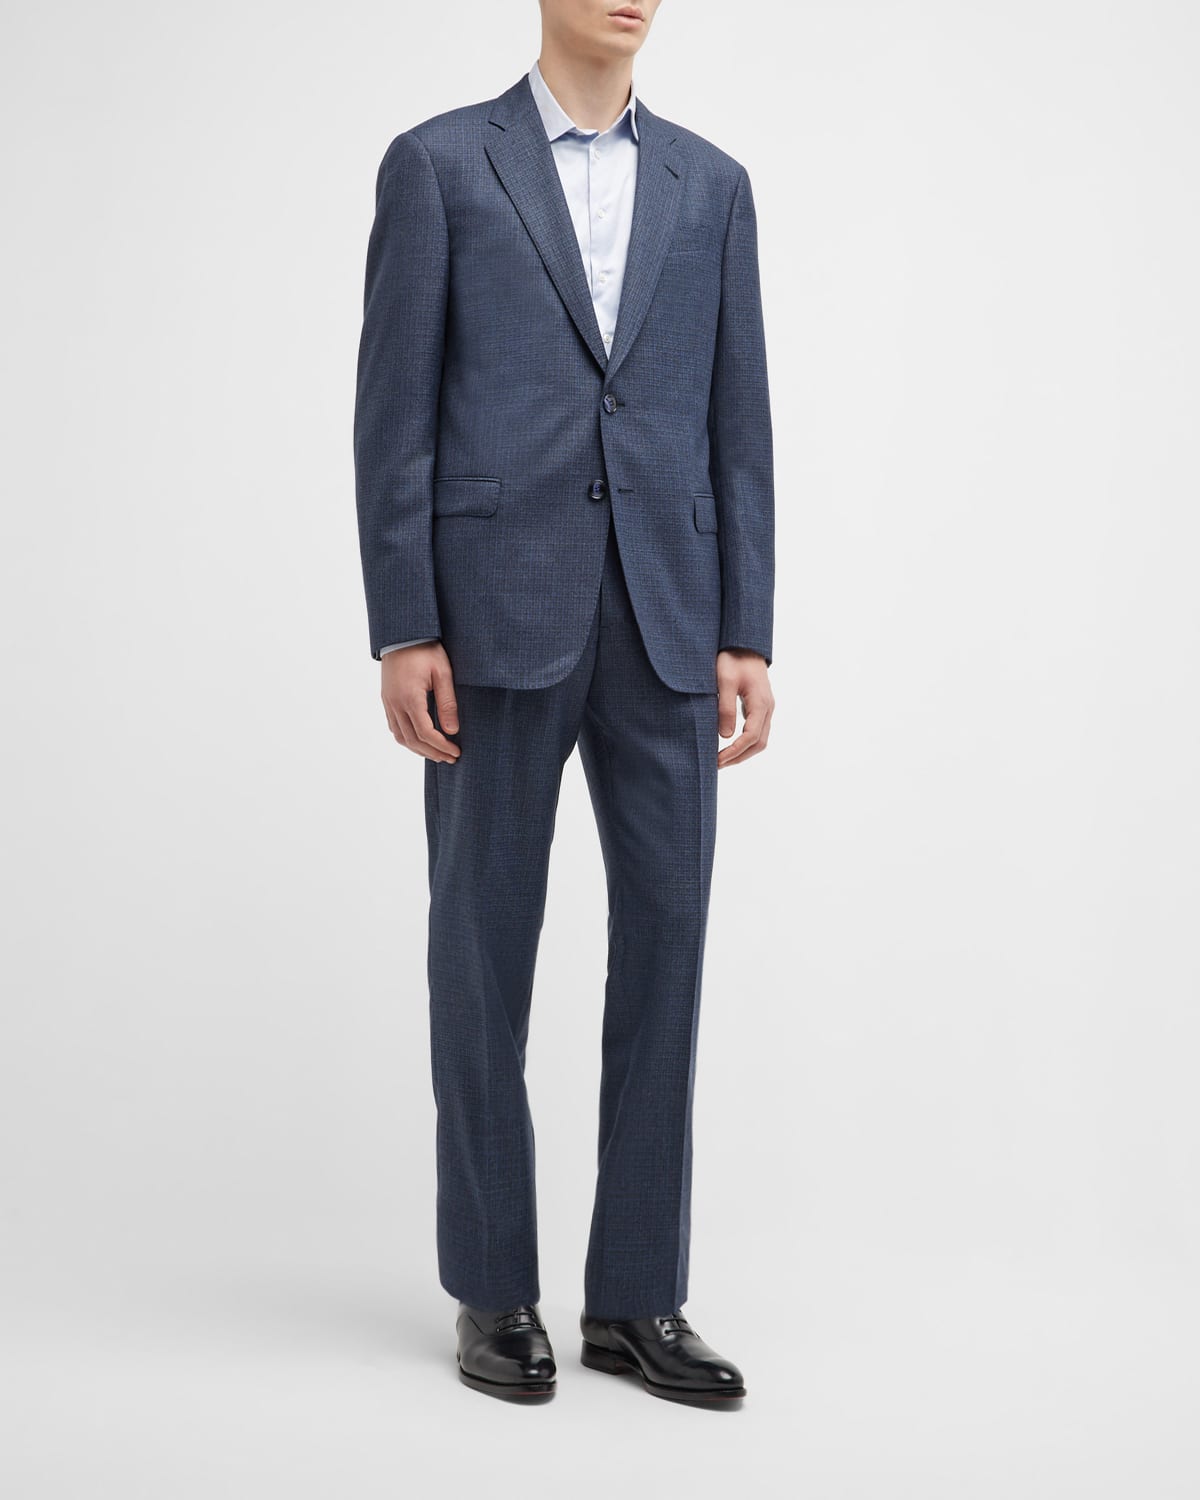 Giorgio Armani Men's Micro-pattern Wool Suit In Solid Blue Navy | ModeSens